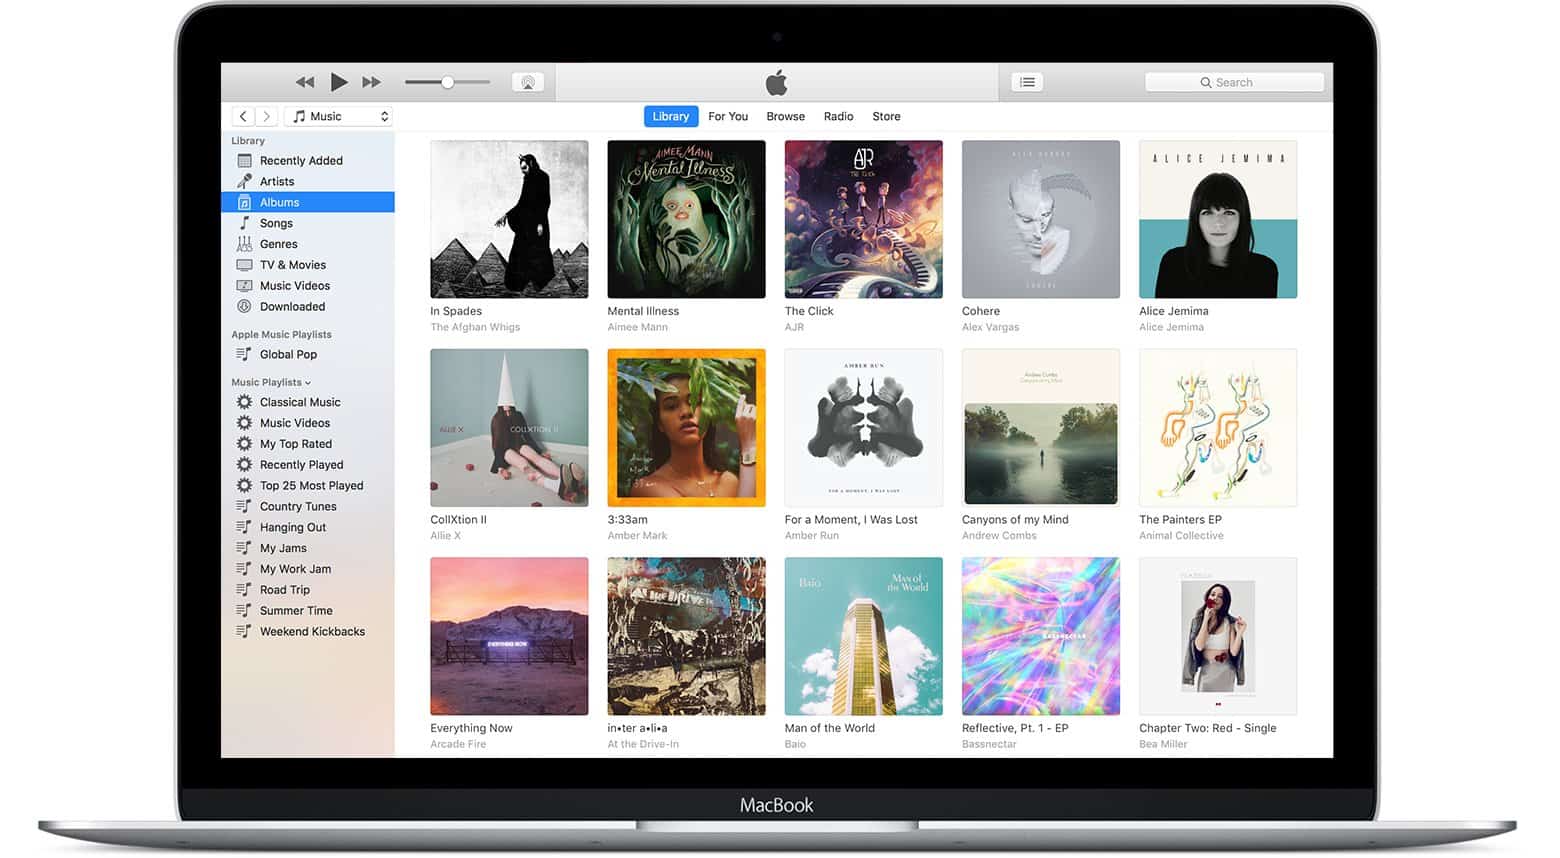 FIX: iPhone XS and iOS 12 devices not connecting to iTunes 12.8 on Mac